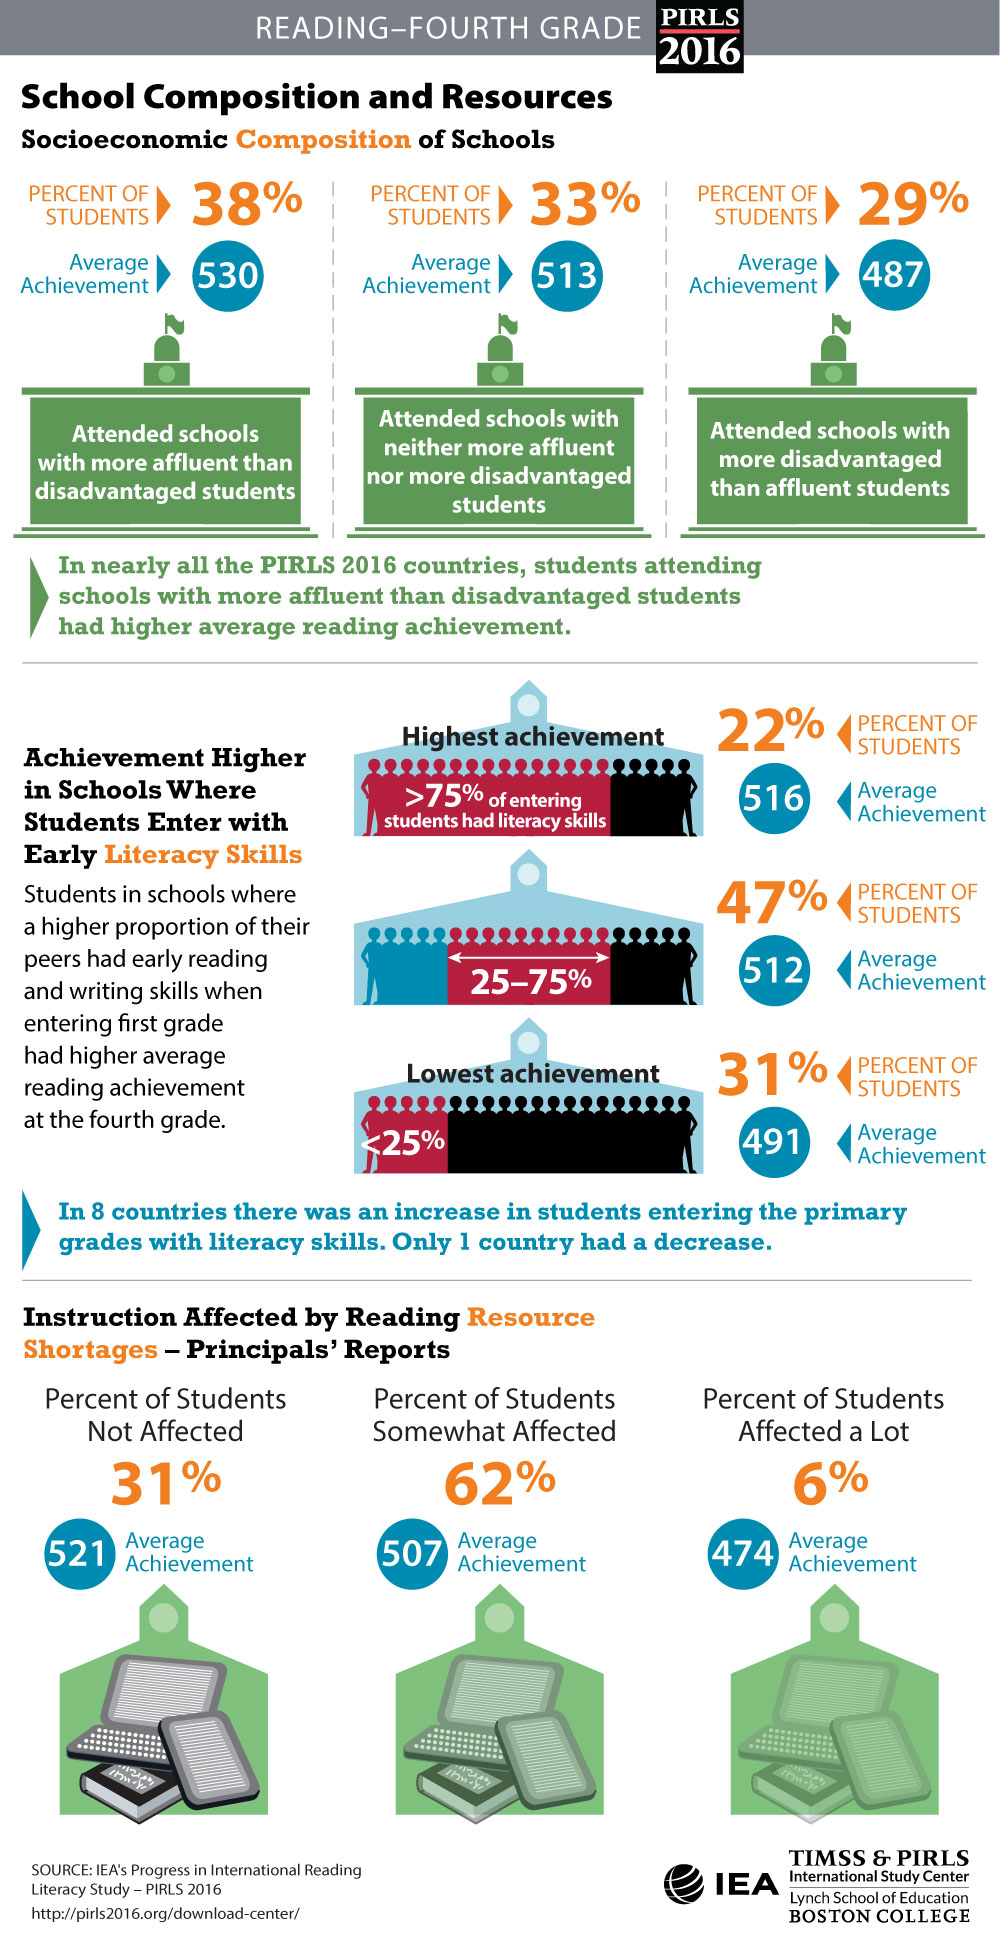 School Composition and Resources Infographic